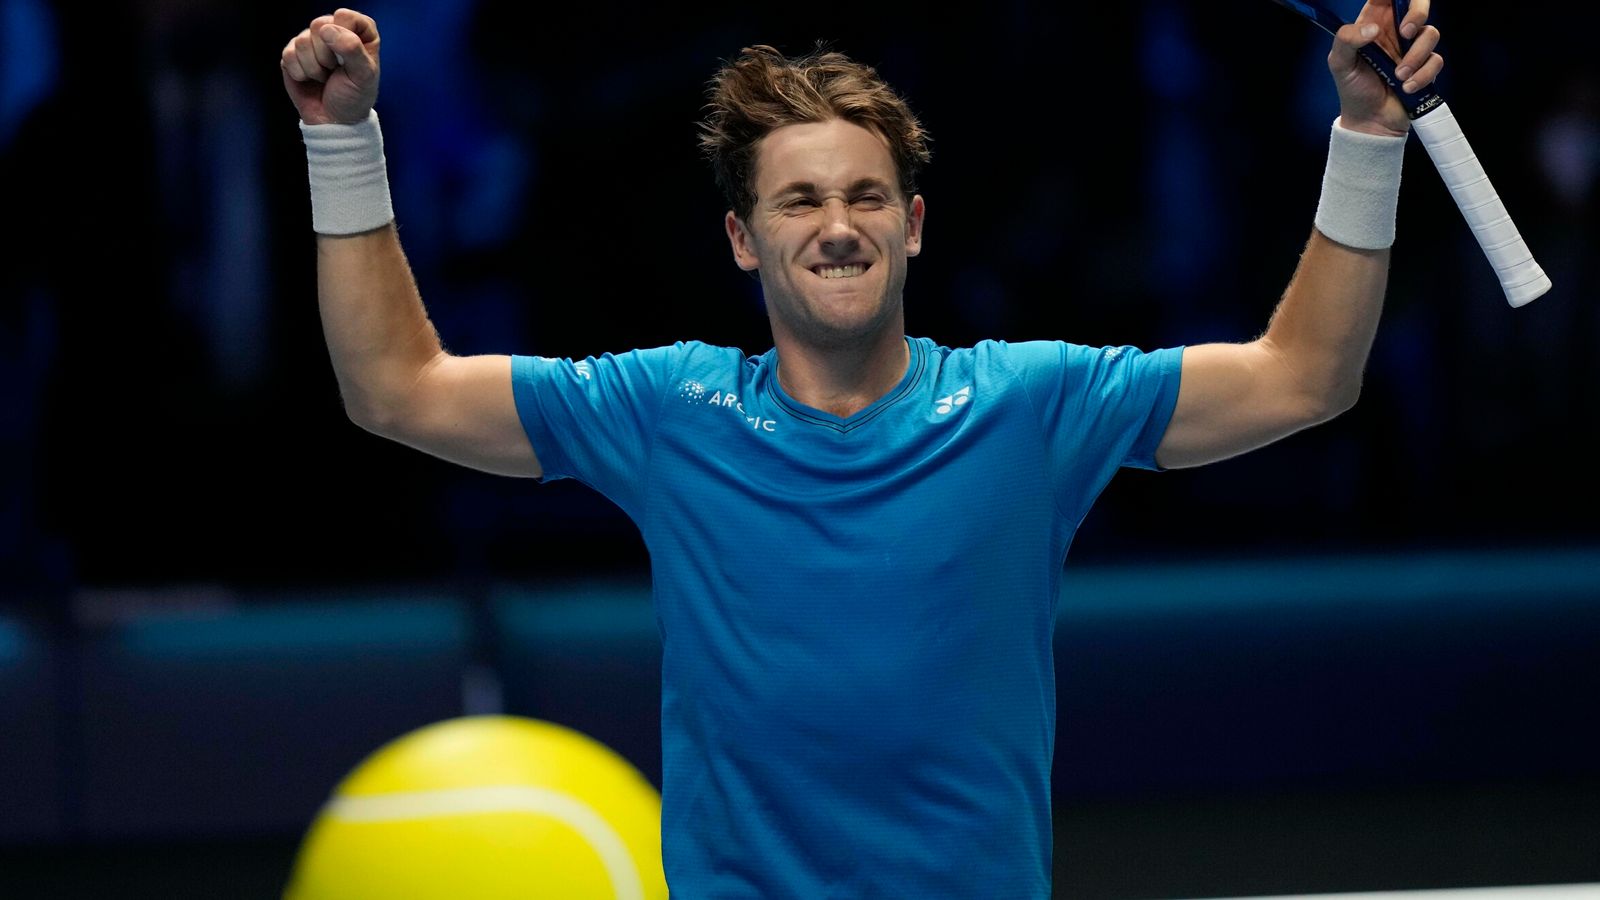 ATP Finals: Casper Ruud completes last-four line-up at ATP finals, setting up meeting with Daniil Medvedev